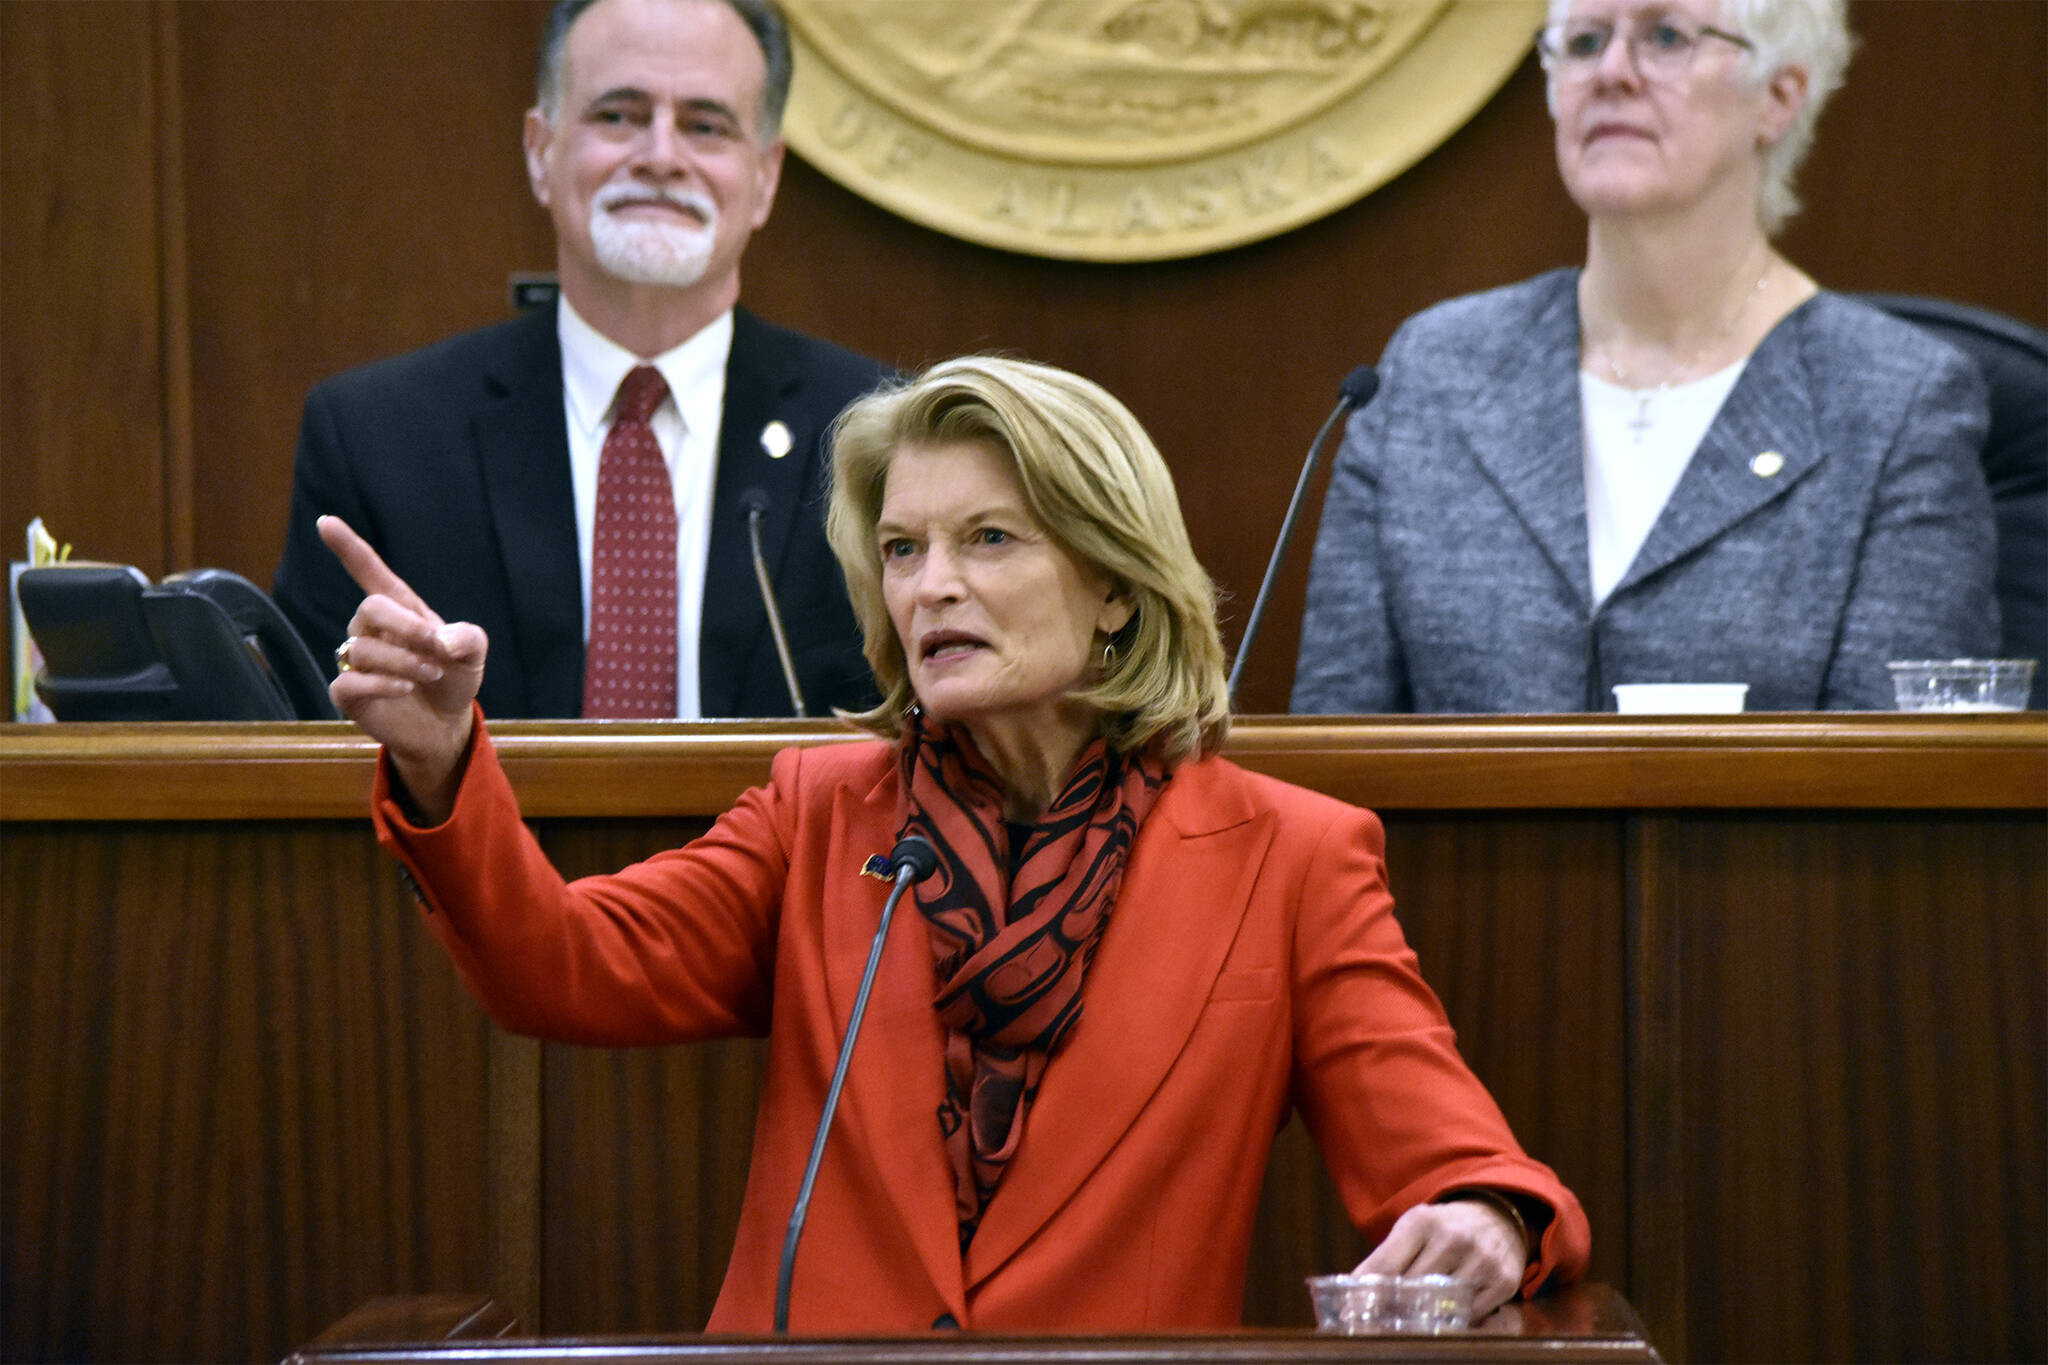 U.S. Sen. Lisa Murkowski, R-Alaska, gave her annual address to the Alaska State Legislature Tuesday, Feb. 22, 2022, at the Capitol building in Juneau. Murkowski’s speech emphasized bipartisanship and making Alaska ready for the opportunities brought by the recent infrastructure package. (Peter Segall / Juneau Empire)